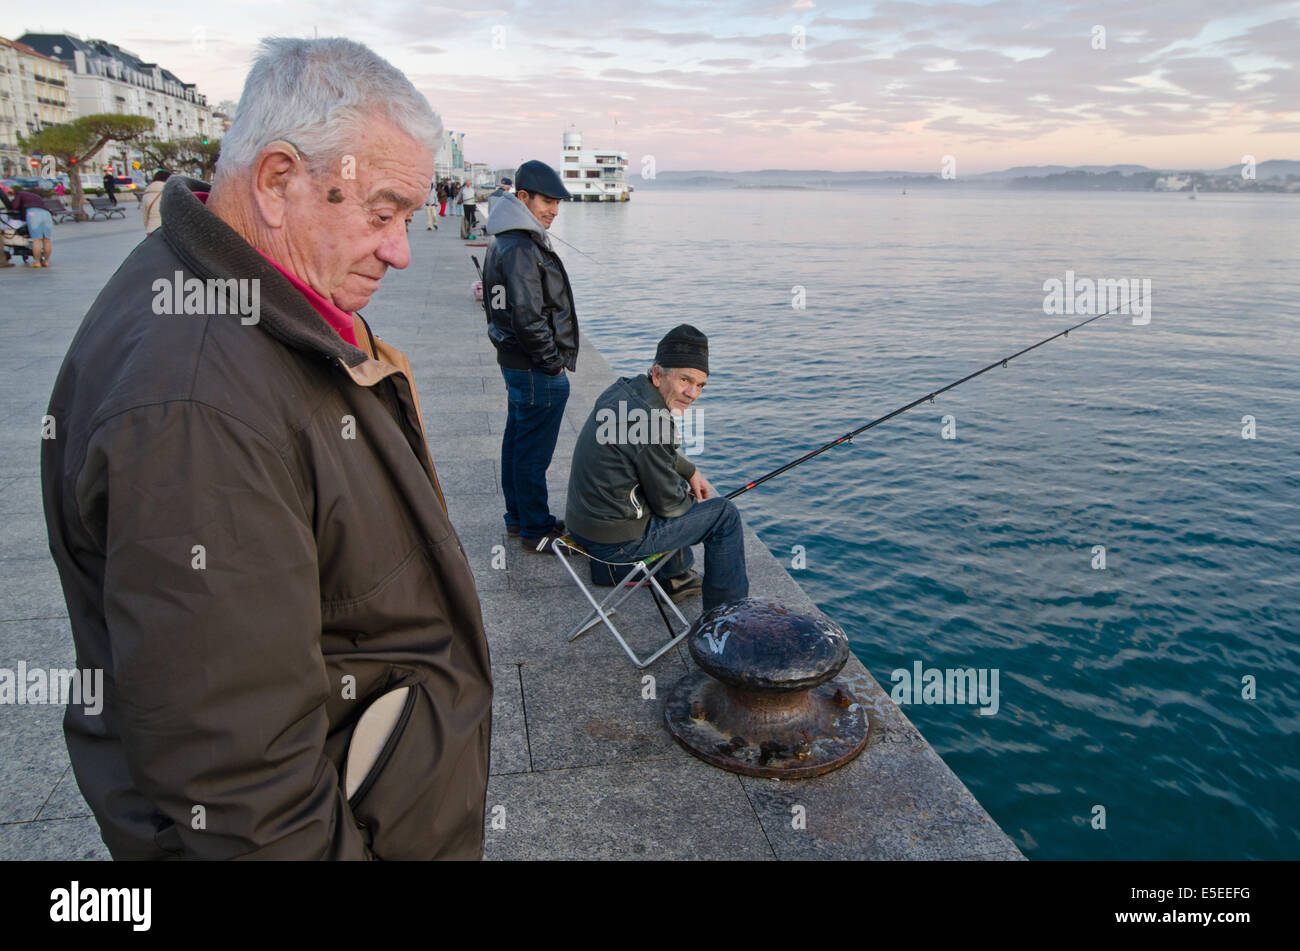 An angler and passers-by on the old dock on Paseo Pereda on Santander's waterfront. In the background, Santander bay can be seen Stock Photo